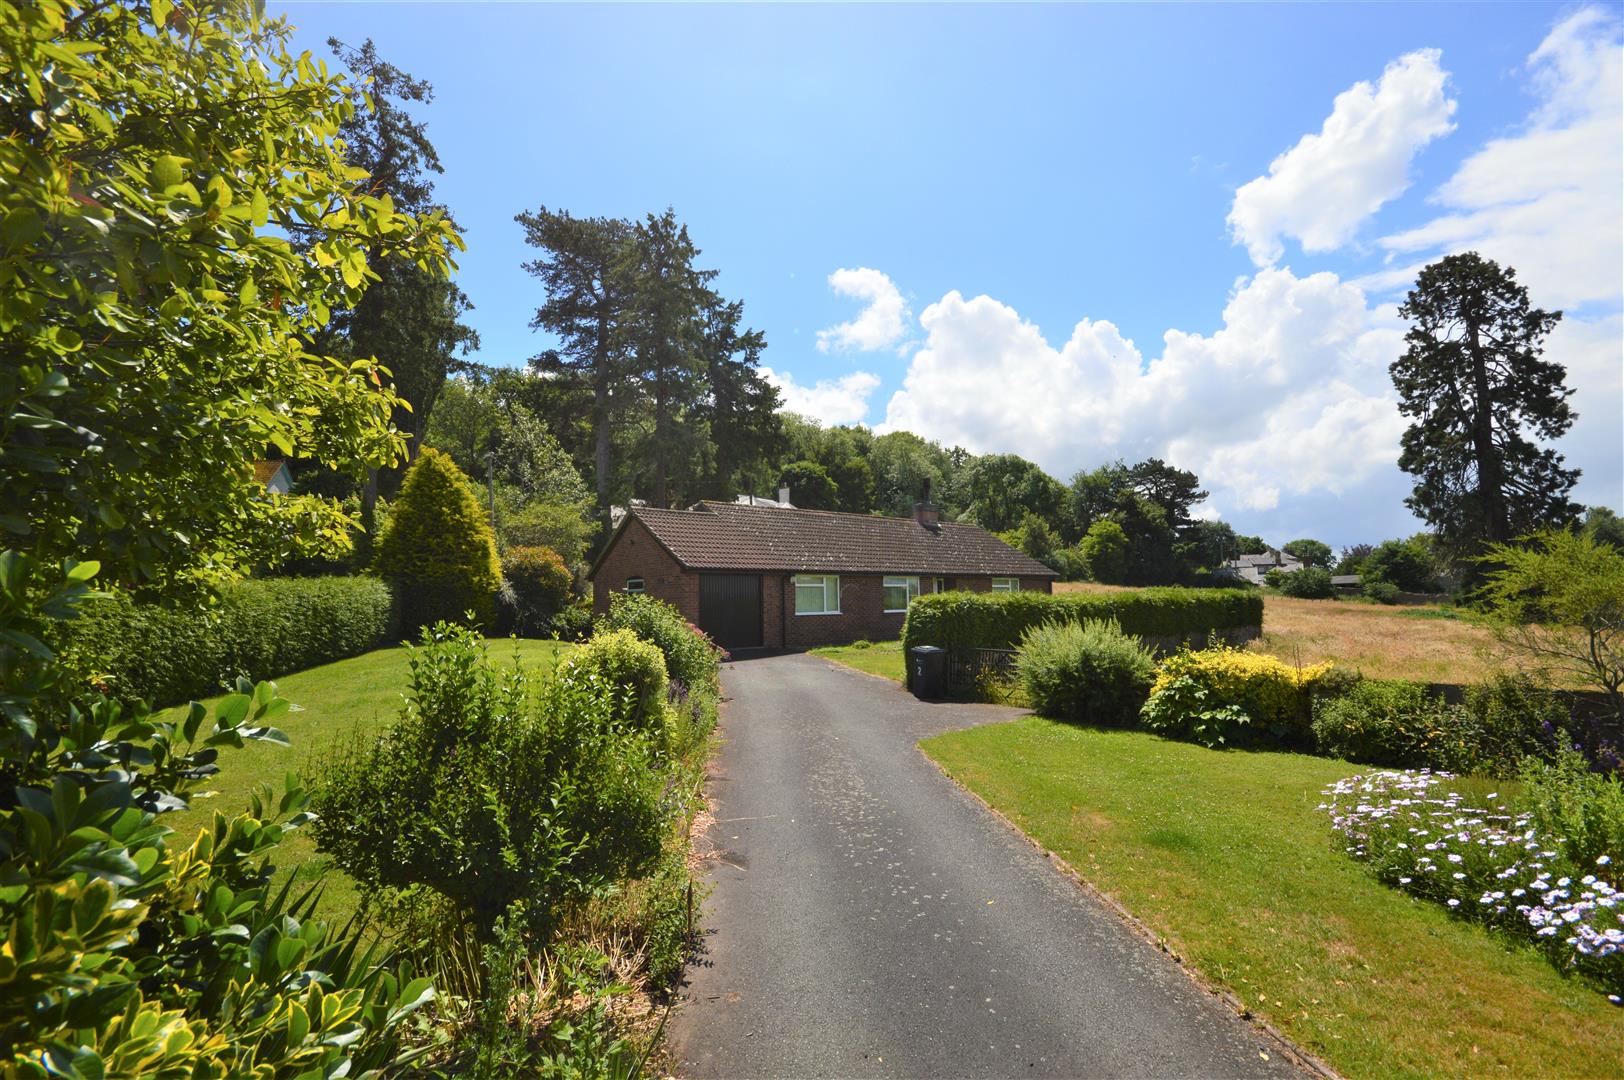 3 bed detached bungalow for sale in Leominster 1